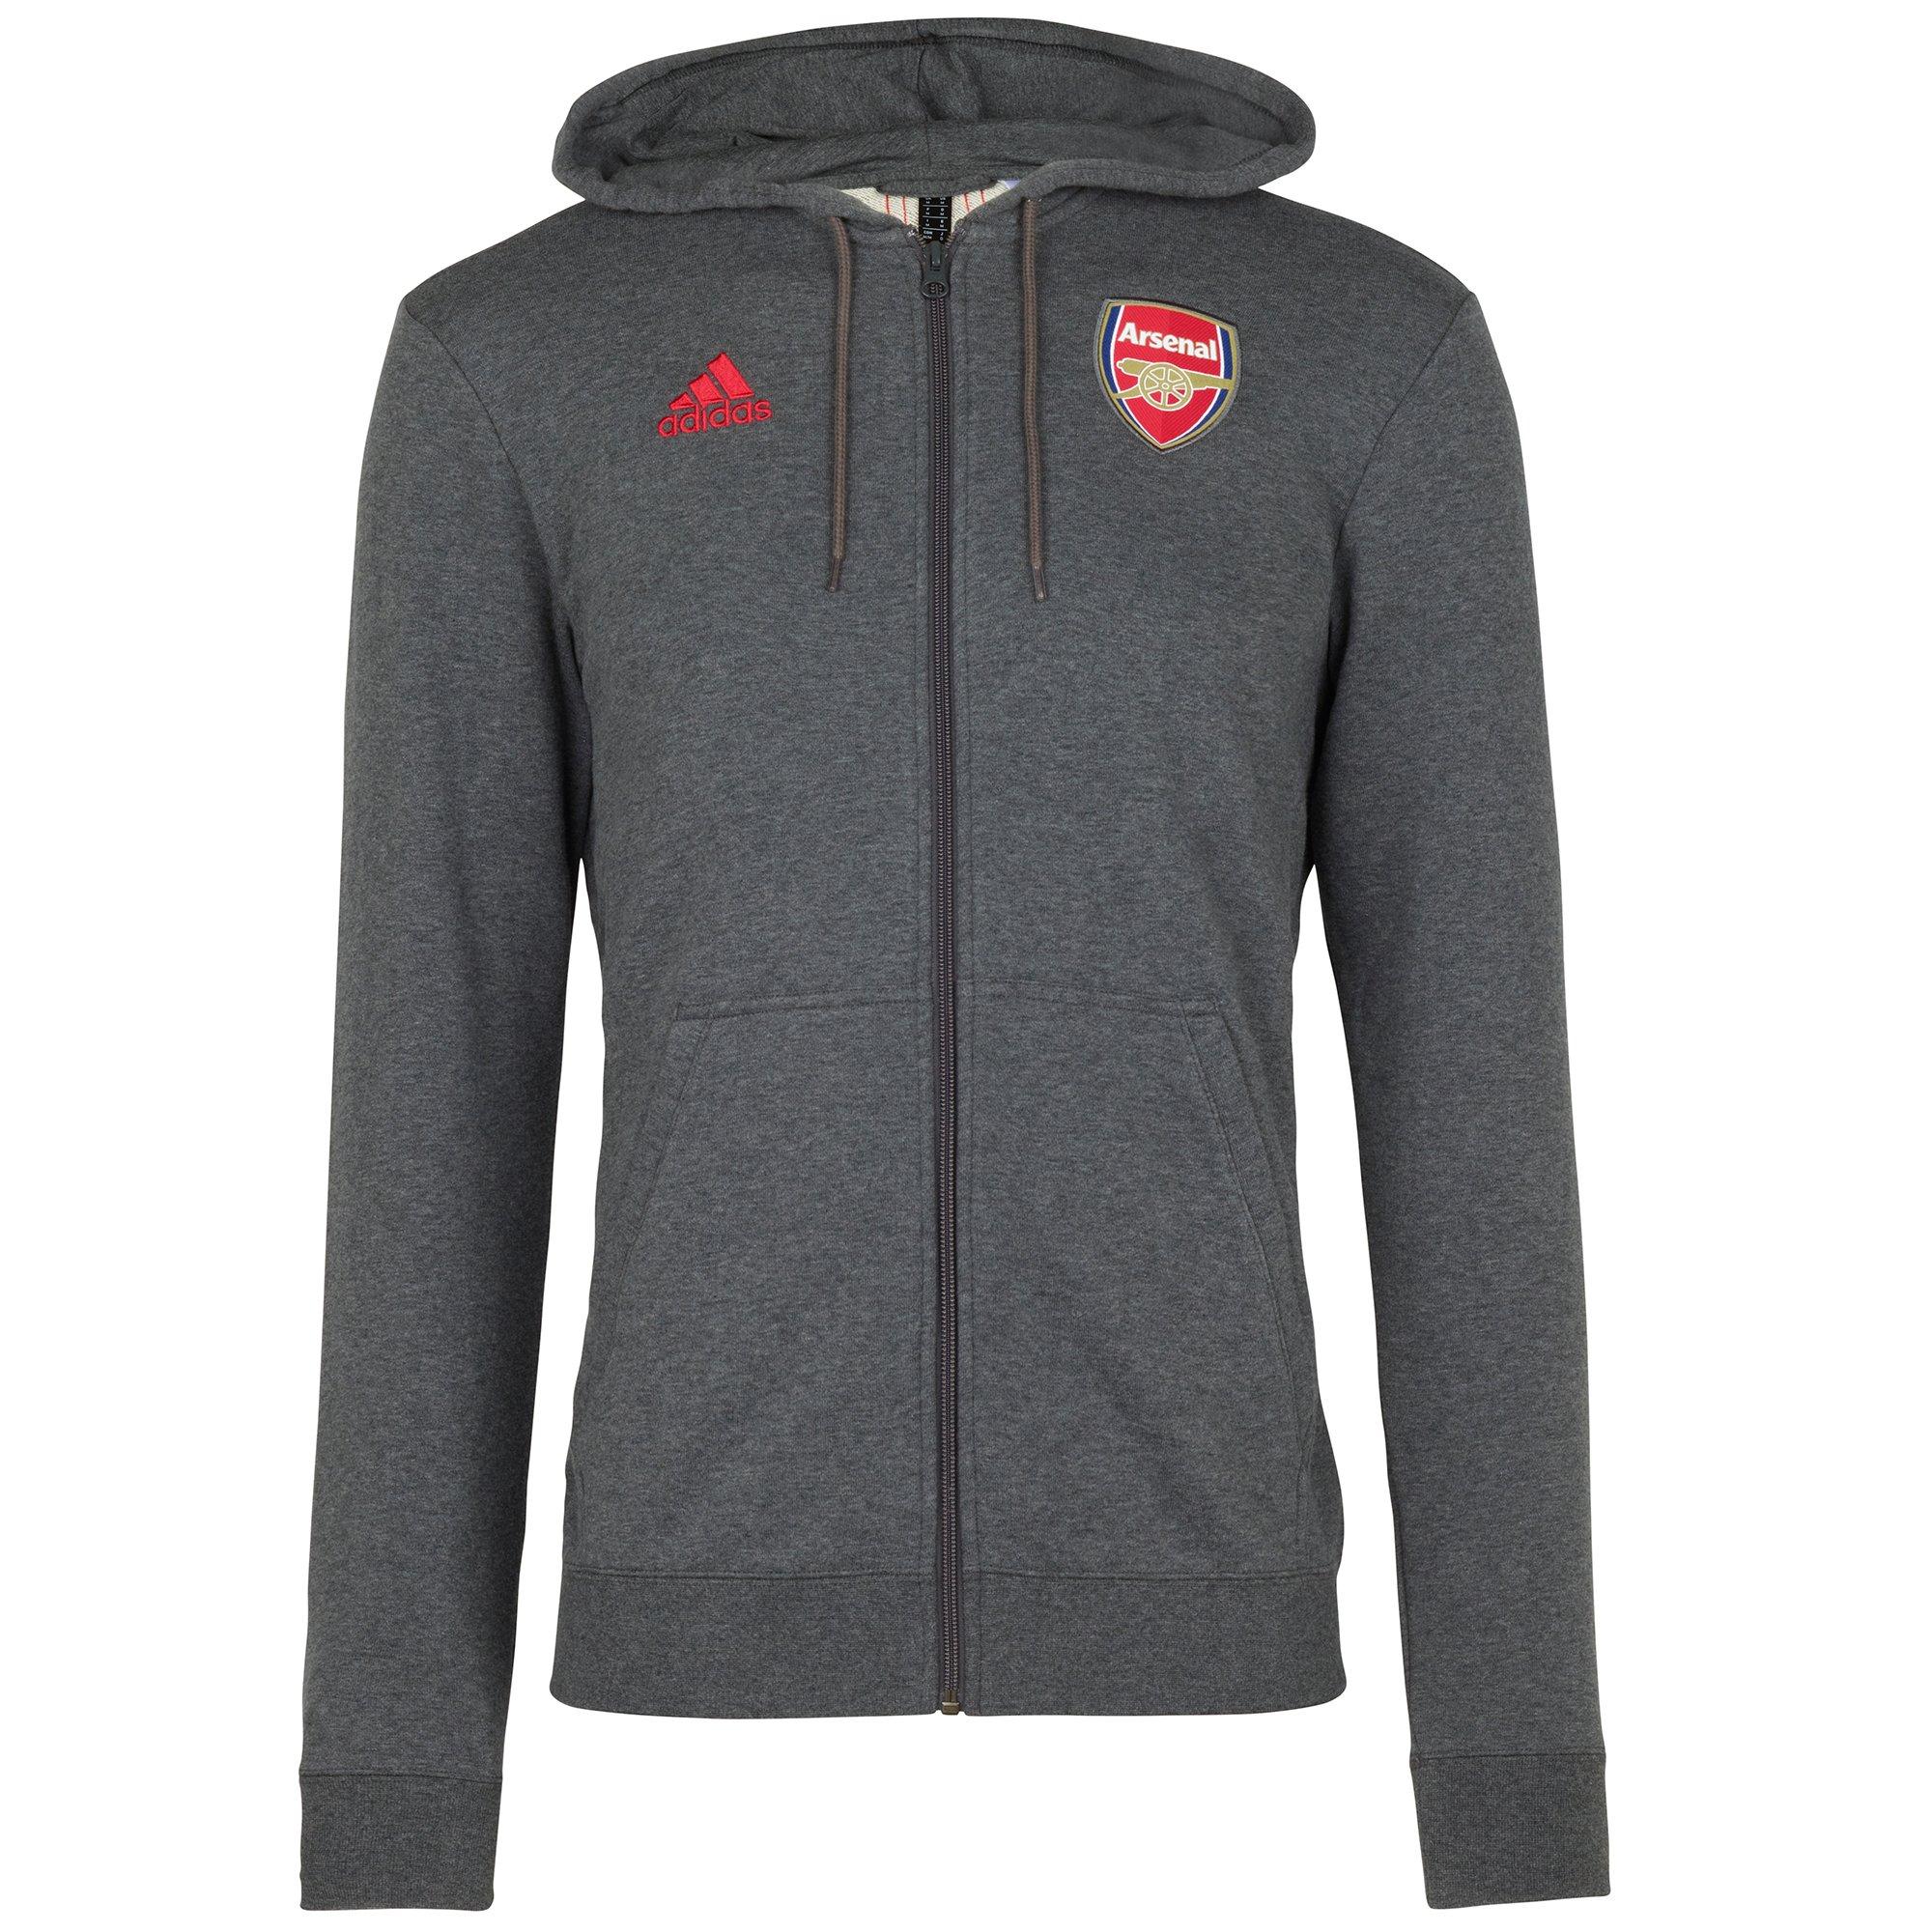 Official Arsenal FC Football Crest Hoodie Adults Unisex Sizes S to 3XL 